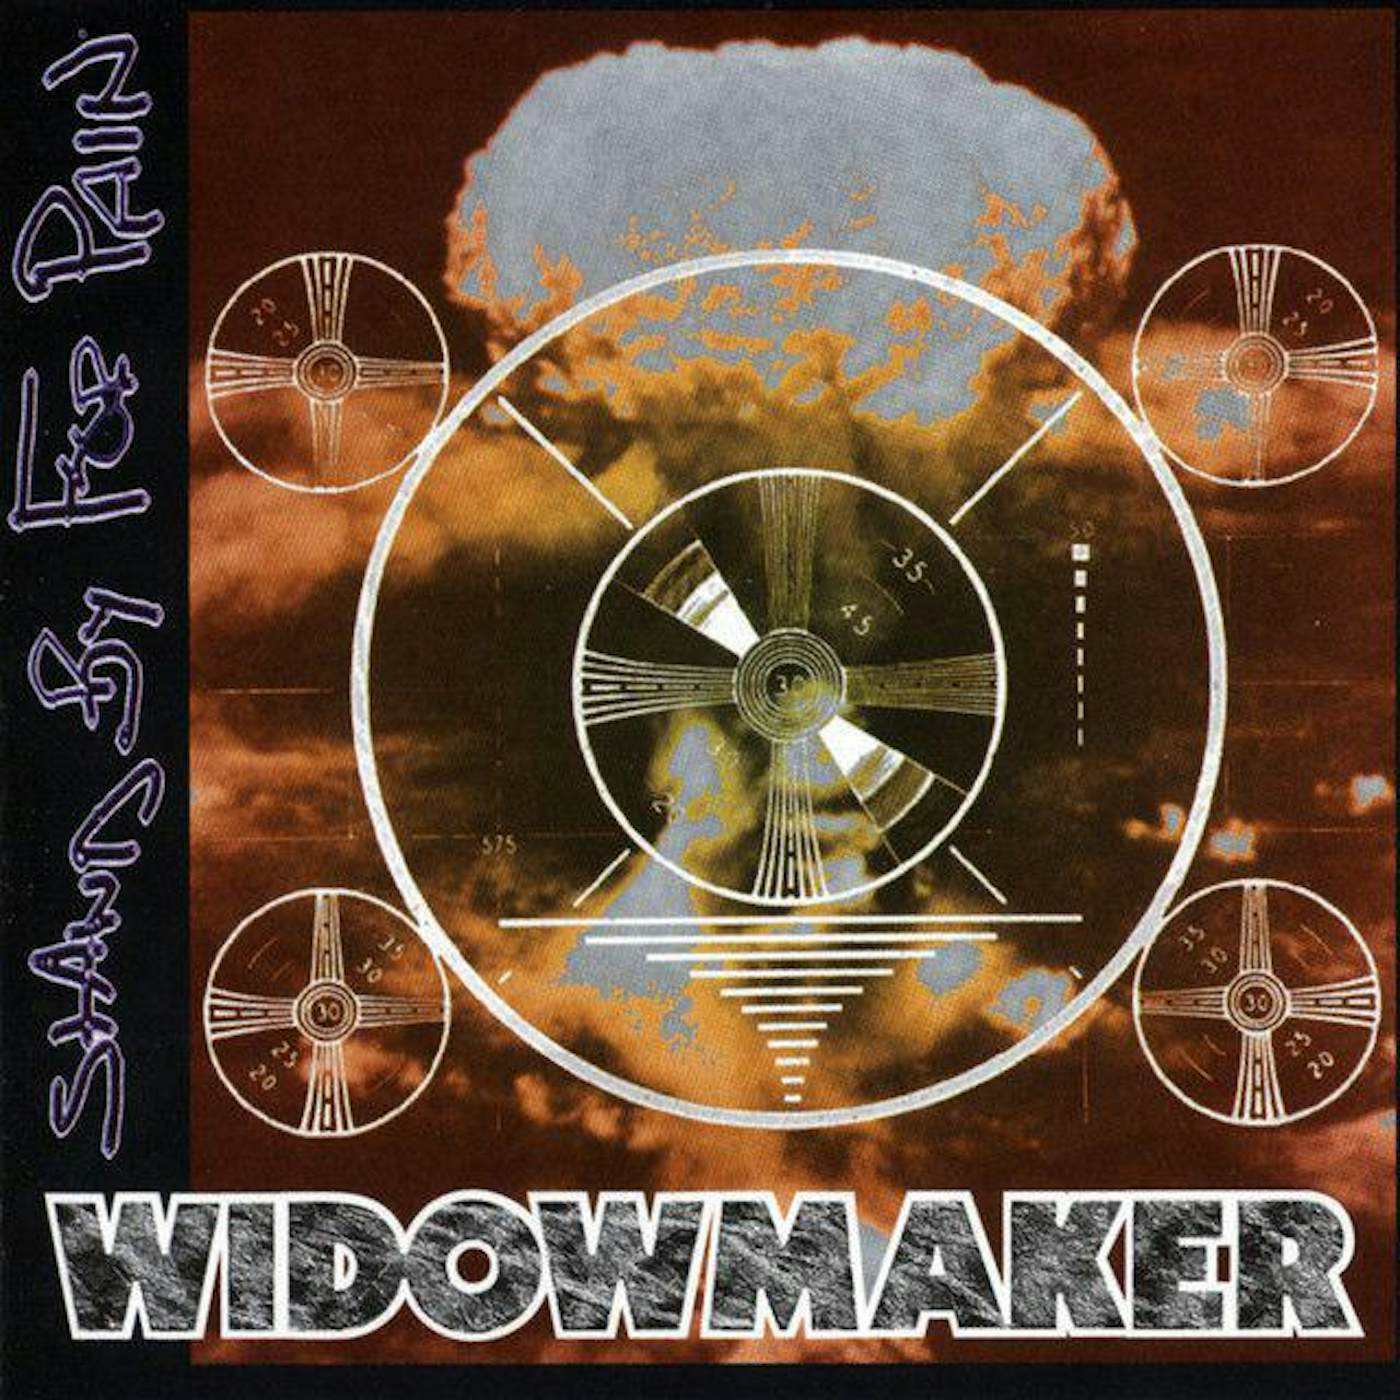 Widowmaker Stand By For Pain (180-Gram/Gold) Vinyl Record